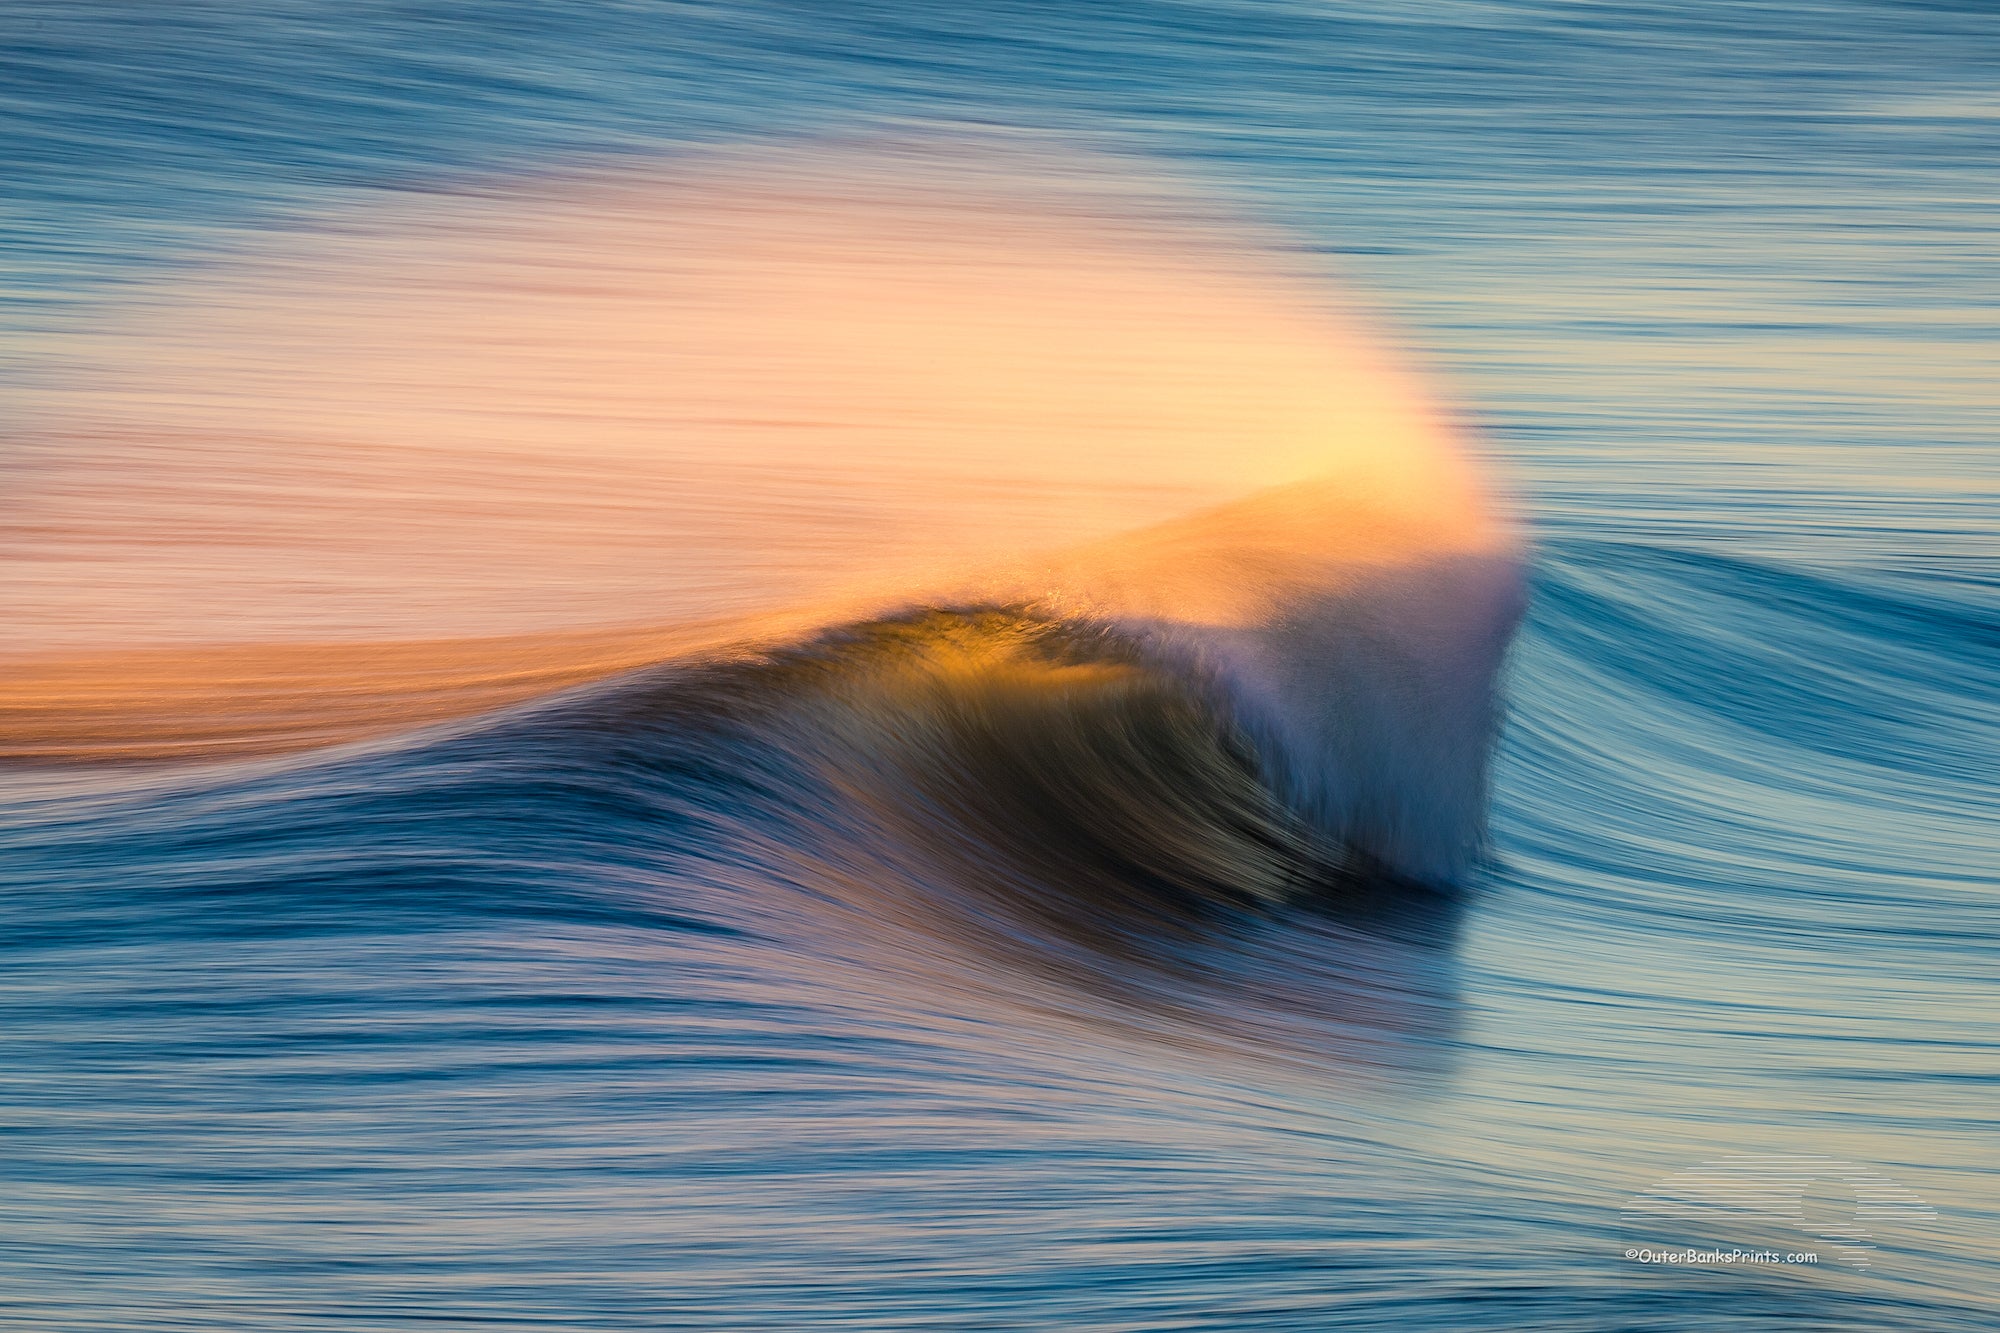 Windblown spray from the surf, back lit by the rising sun in Kill Devil Hills on the Outer Banks of North Carolina.